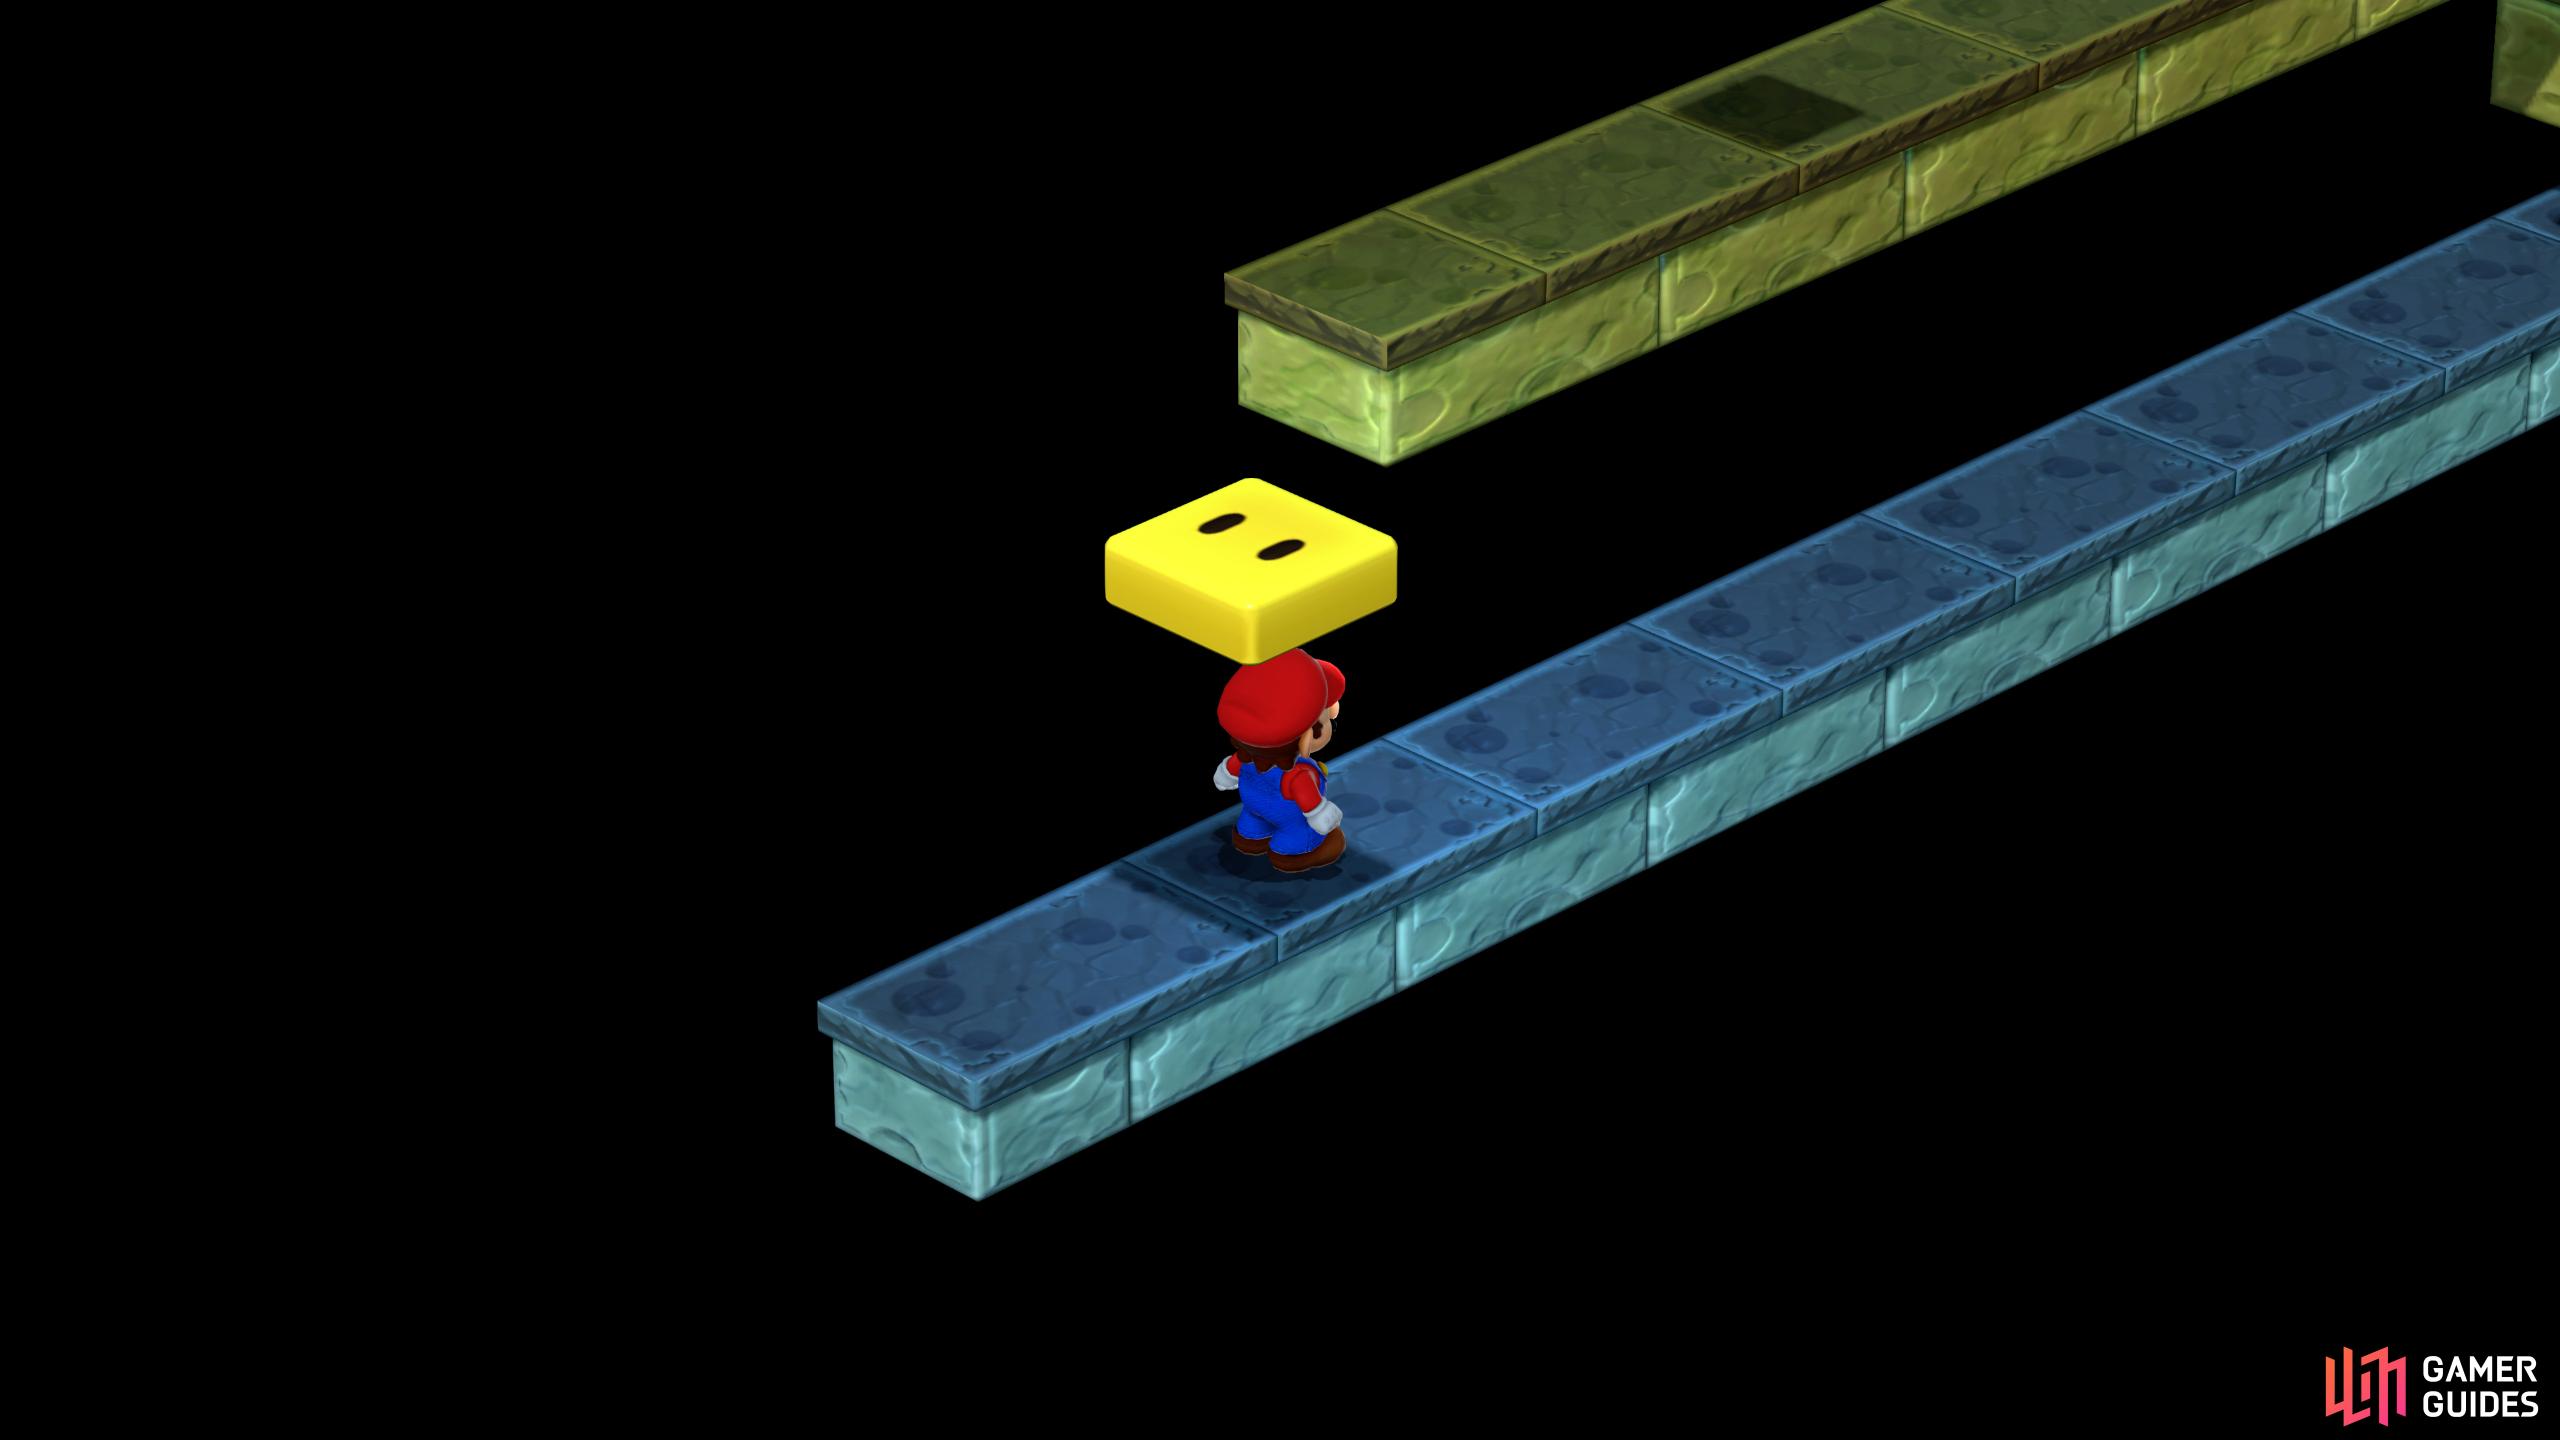 Jump up at the start of the ledge to reveal the yellow block.